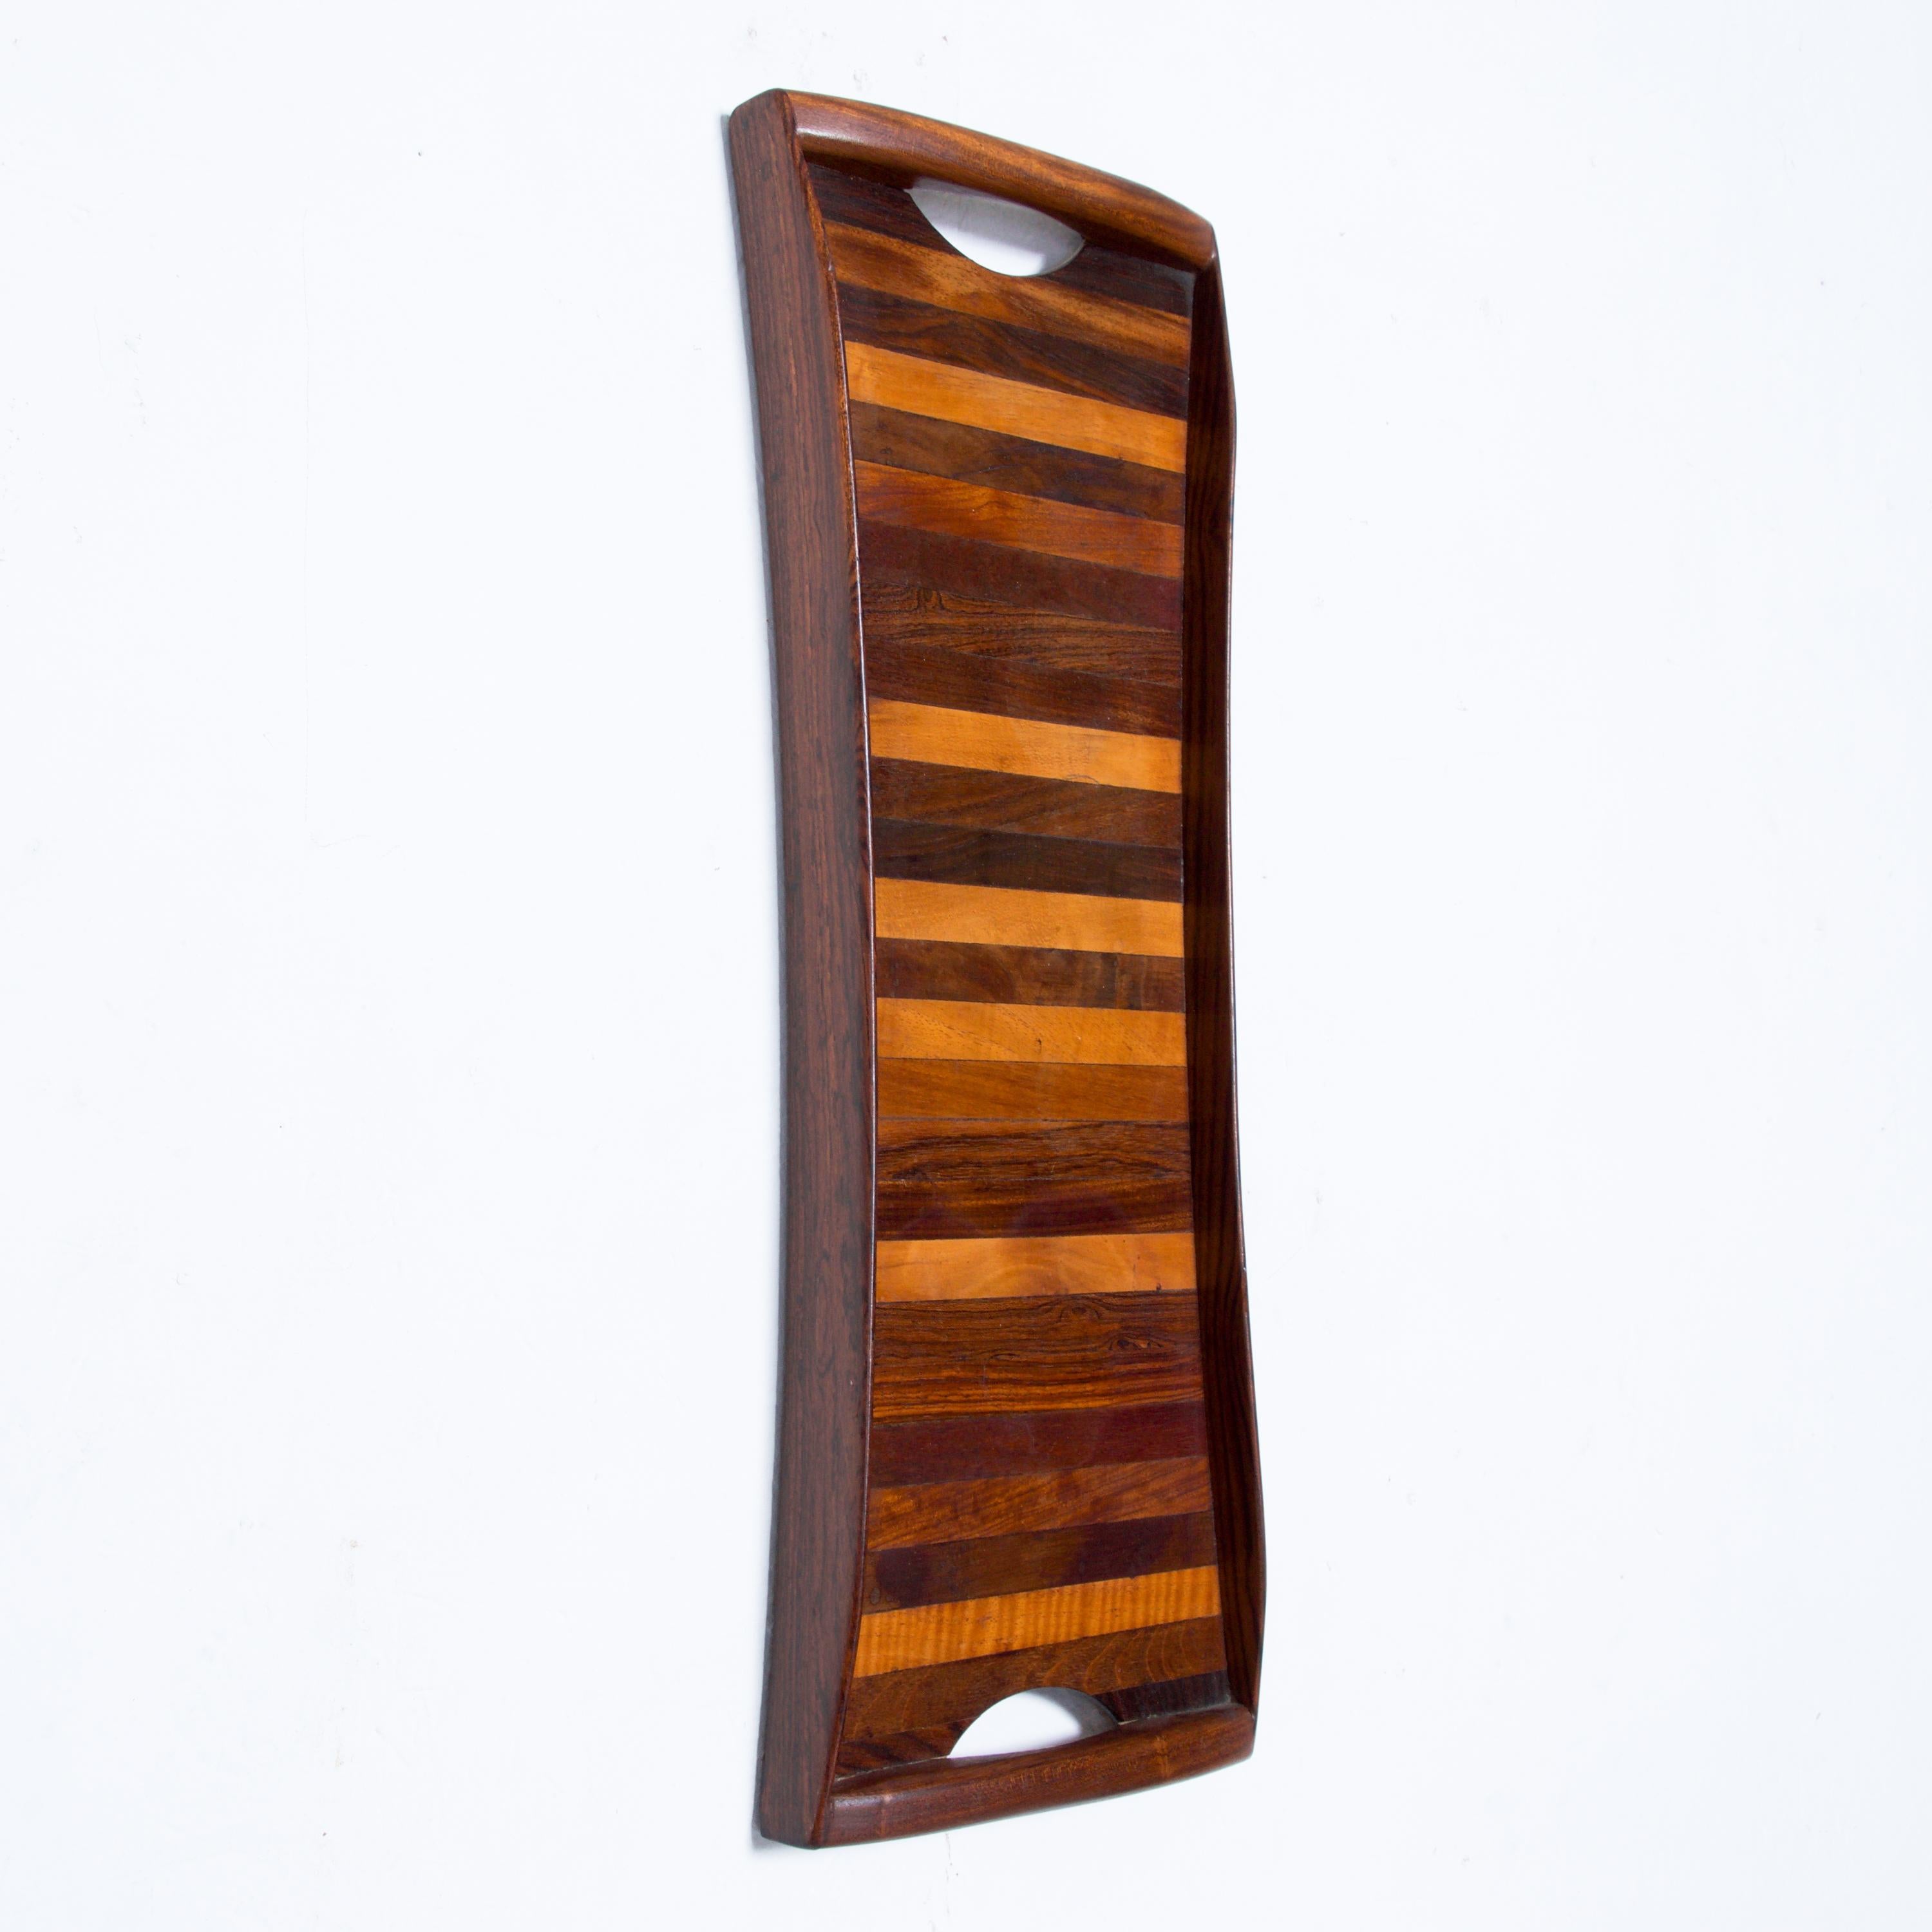 Service tray
Don Shoemaker for Señal sculptural exotic wood long tapered serving tray with handles Mexico 1970s
Curved rosewood tray designed and produced in Mexico.
Slightly bowed edges framed by four curved pieces of solid rosewood. There is a